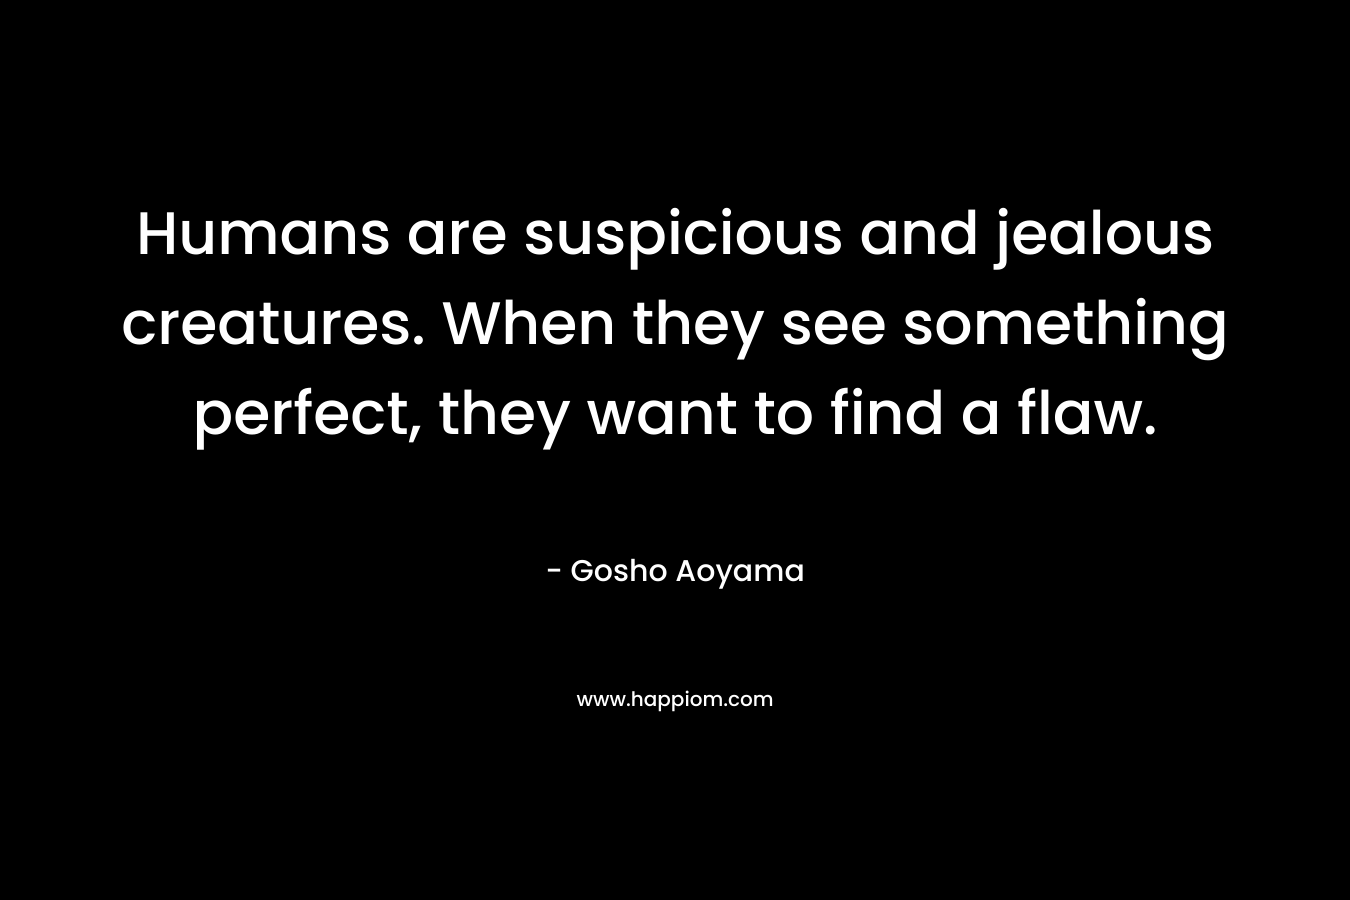 Humans are suspicious and jealous creatures. When they see something perfect, they want to find a flaw.